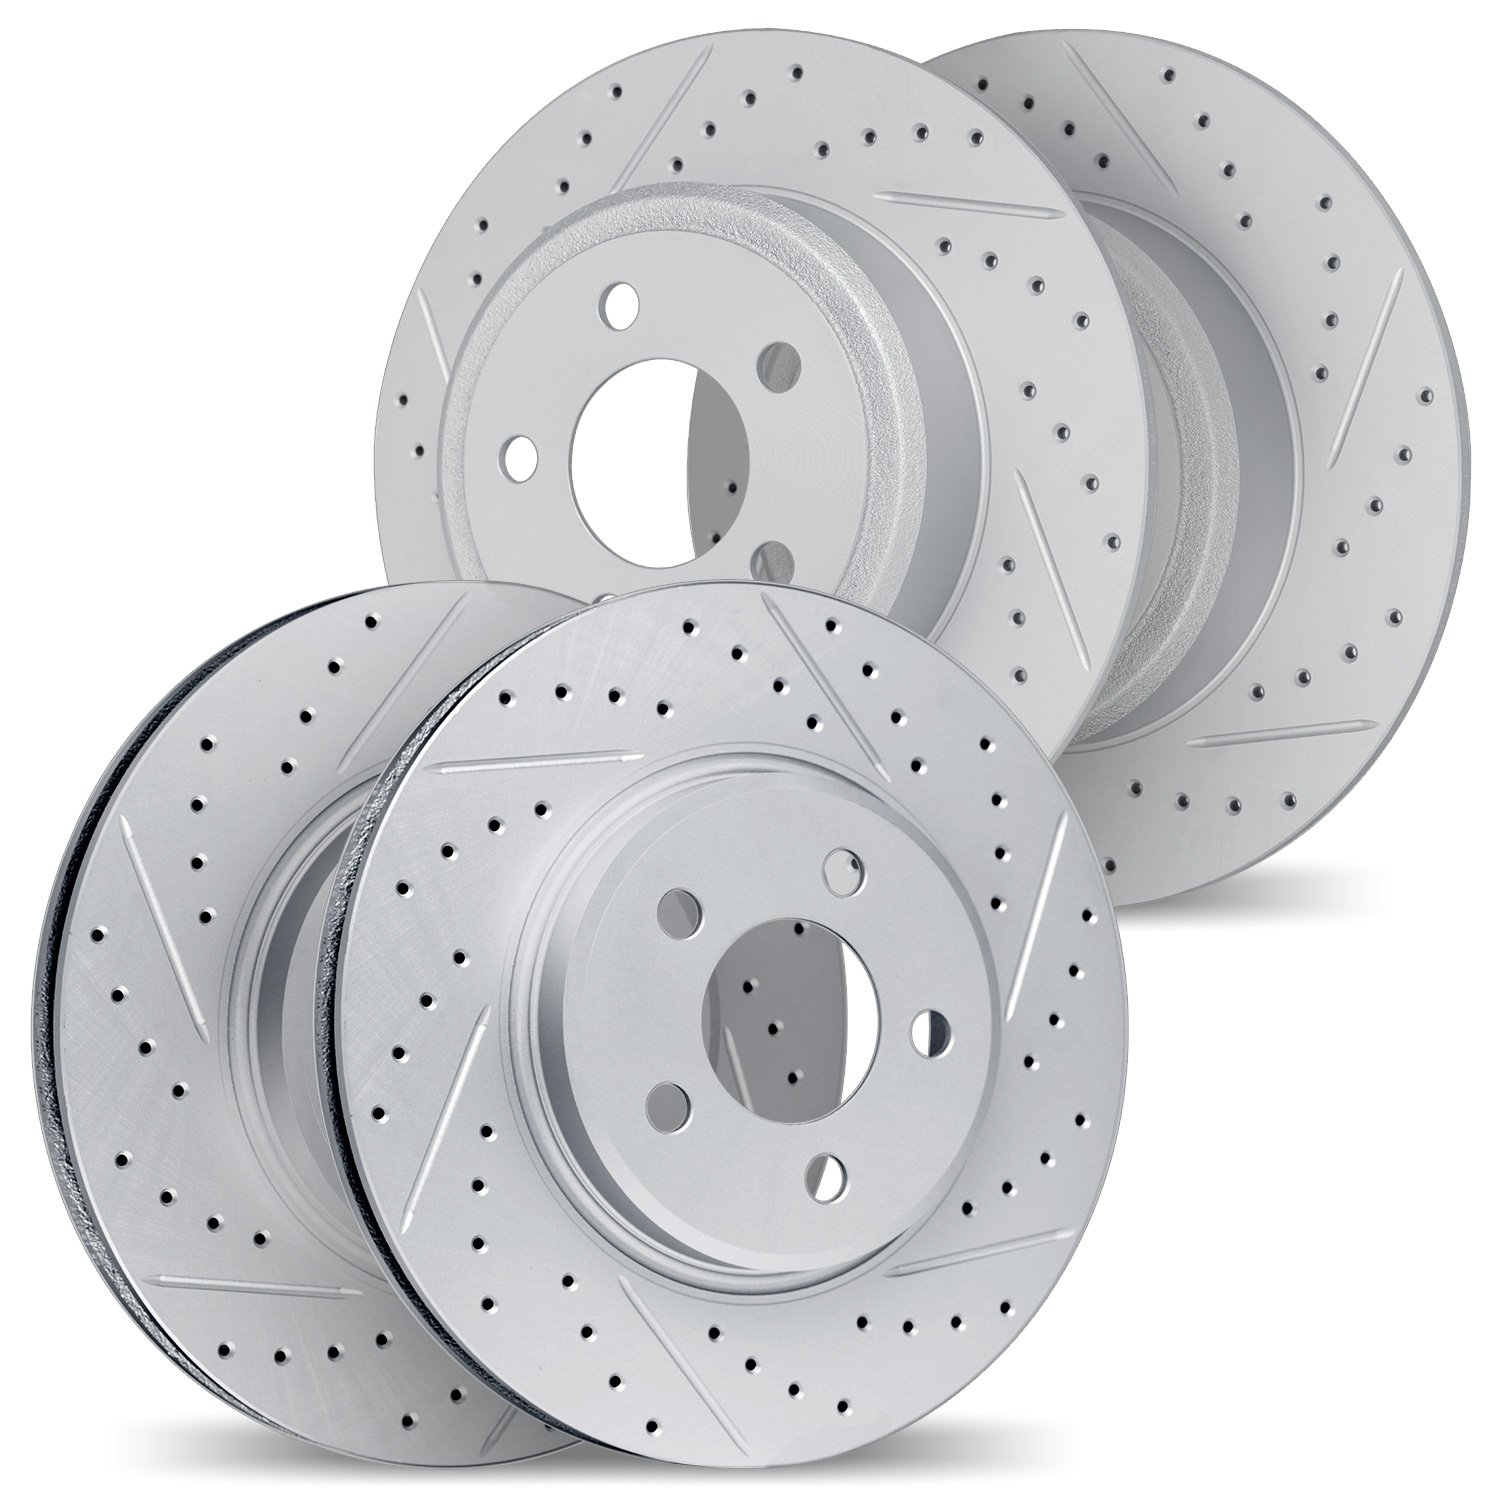 2004-63015 Geoperformance Drilled/Slotted Brake Rotors, 1996-2009 Mercedes-Benz, Position: Front and Rear